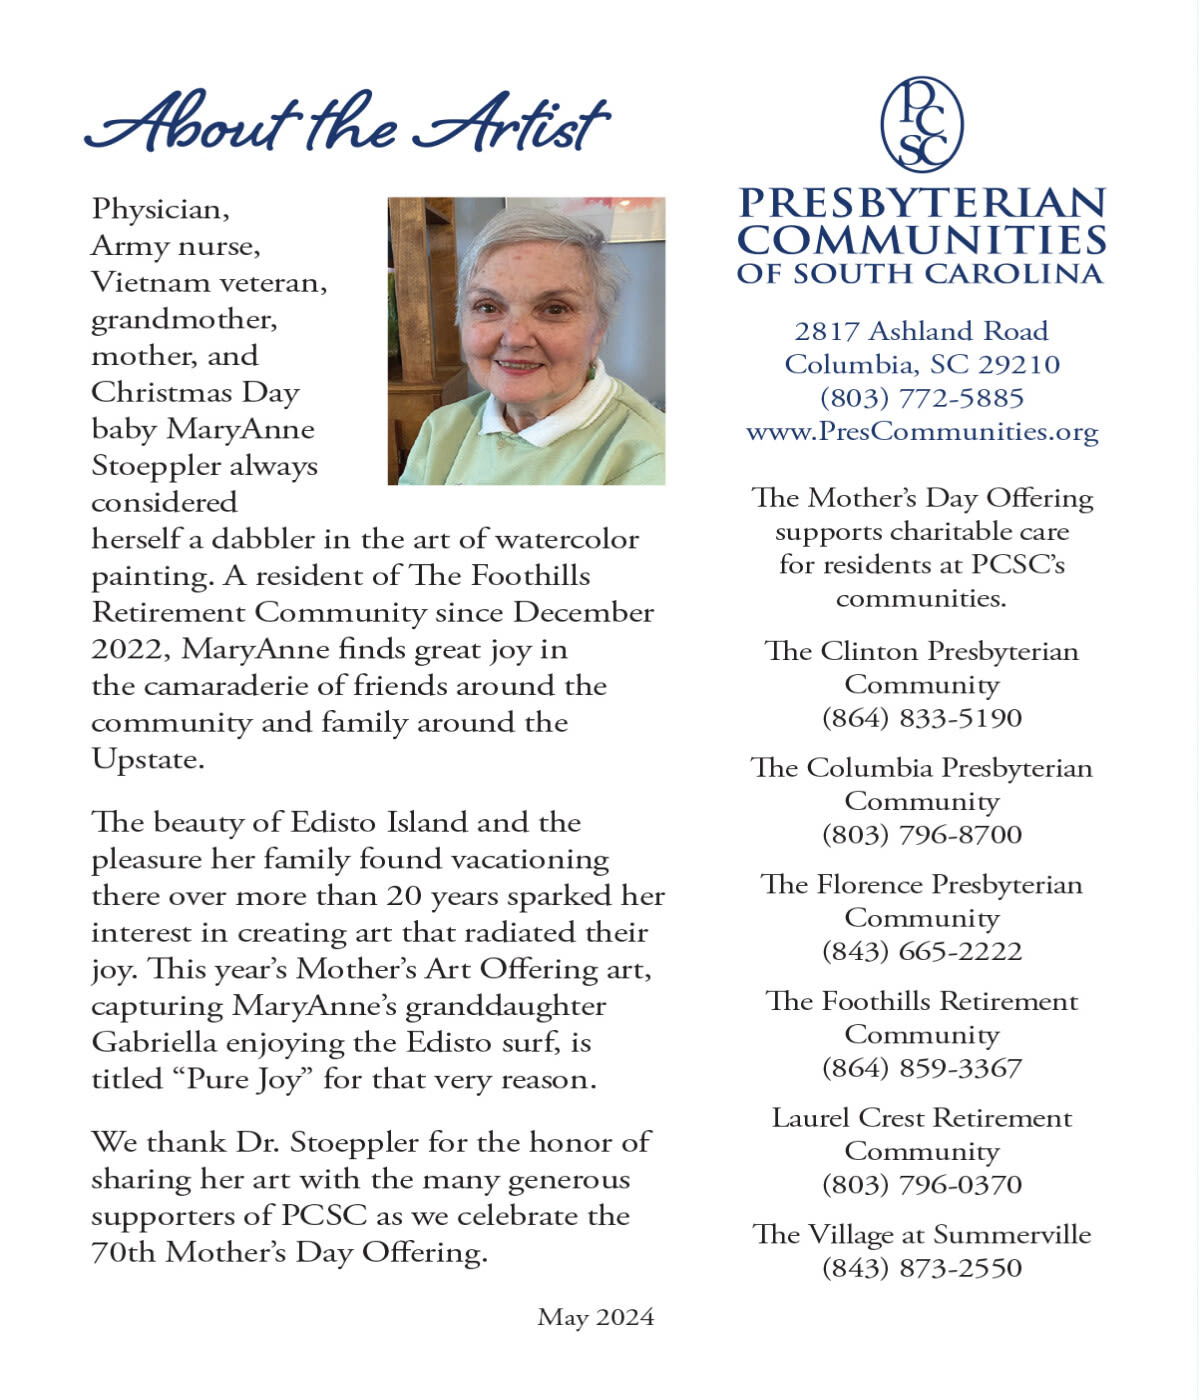 About the artist of the Mother's Day Offering card at Presbyterian Communities of South Carolina